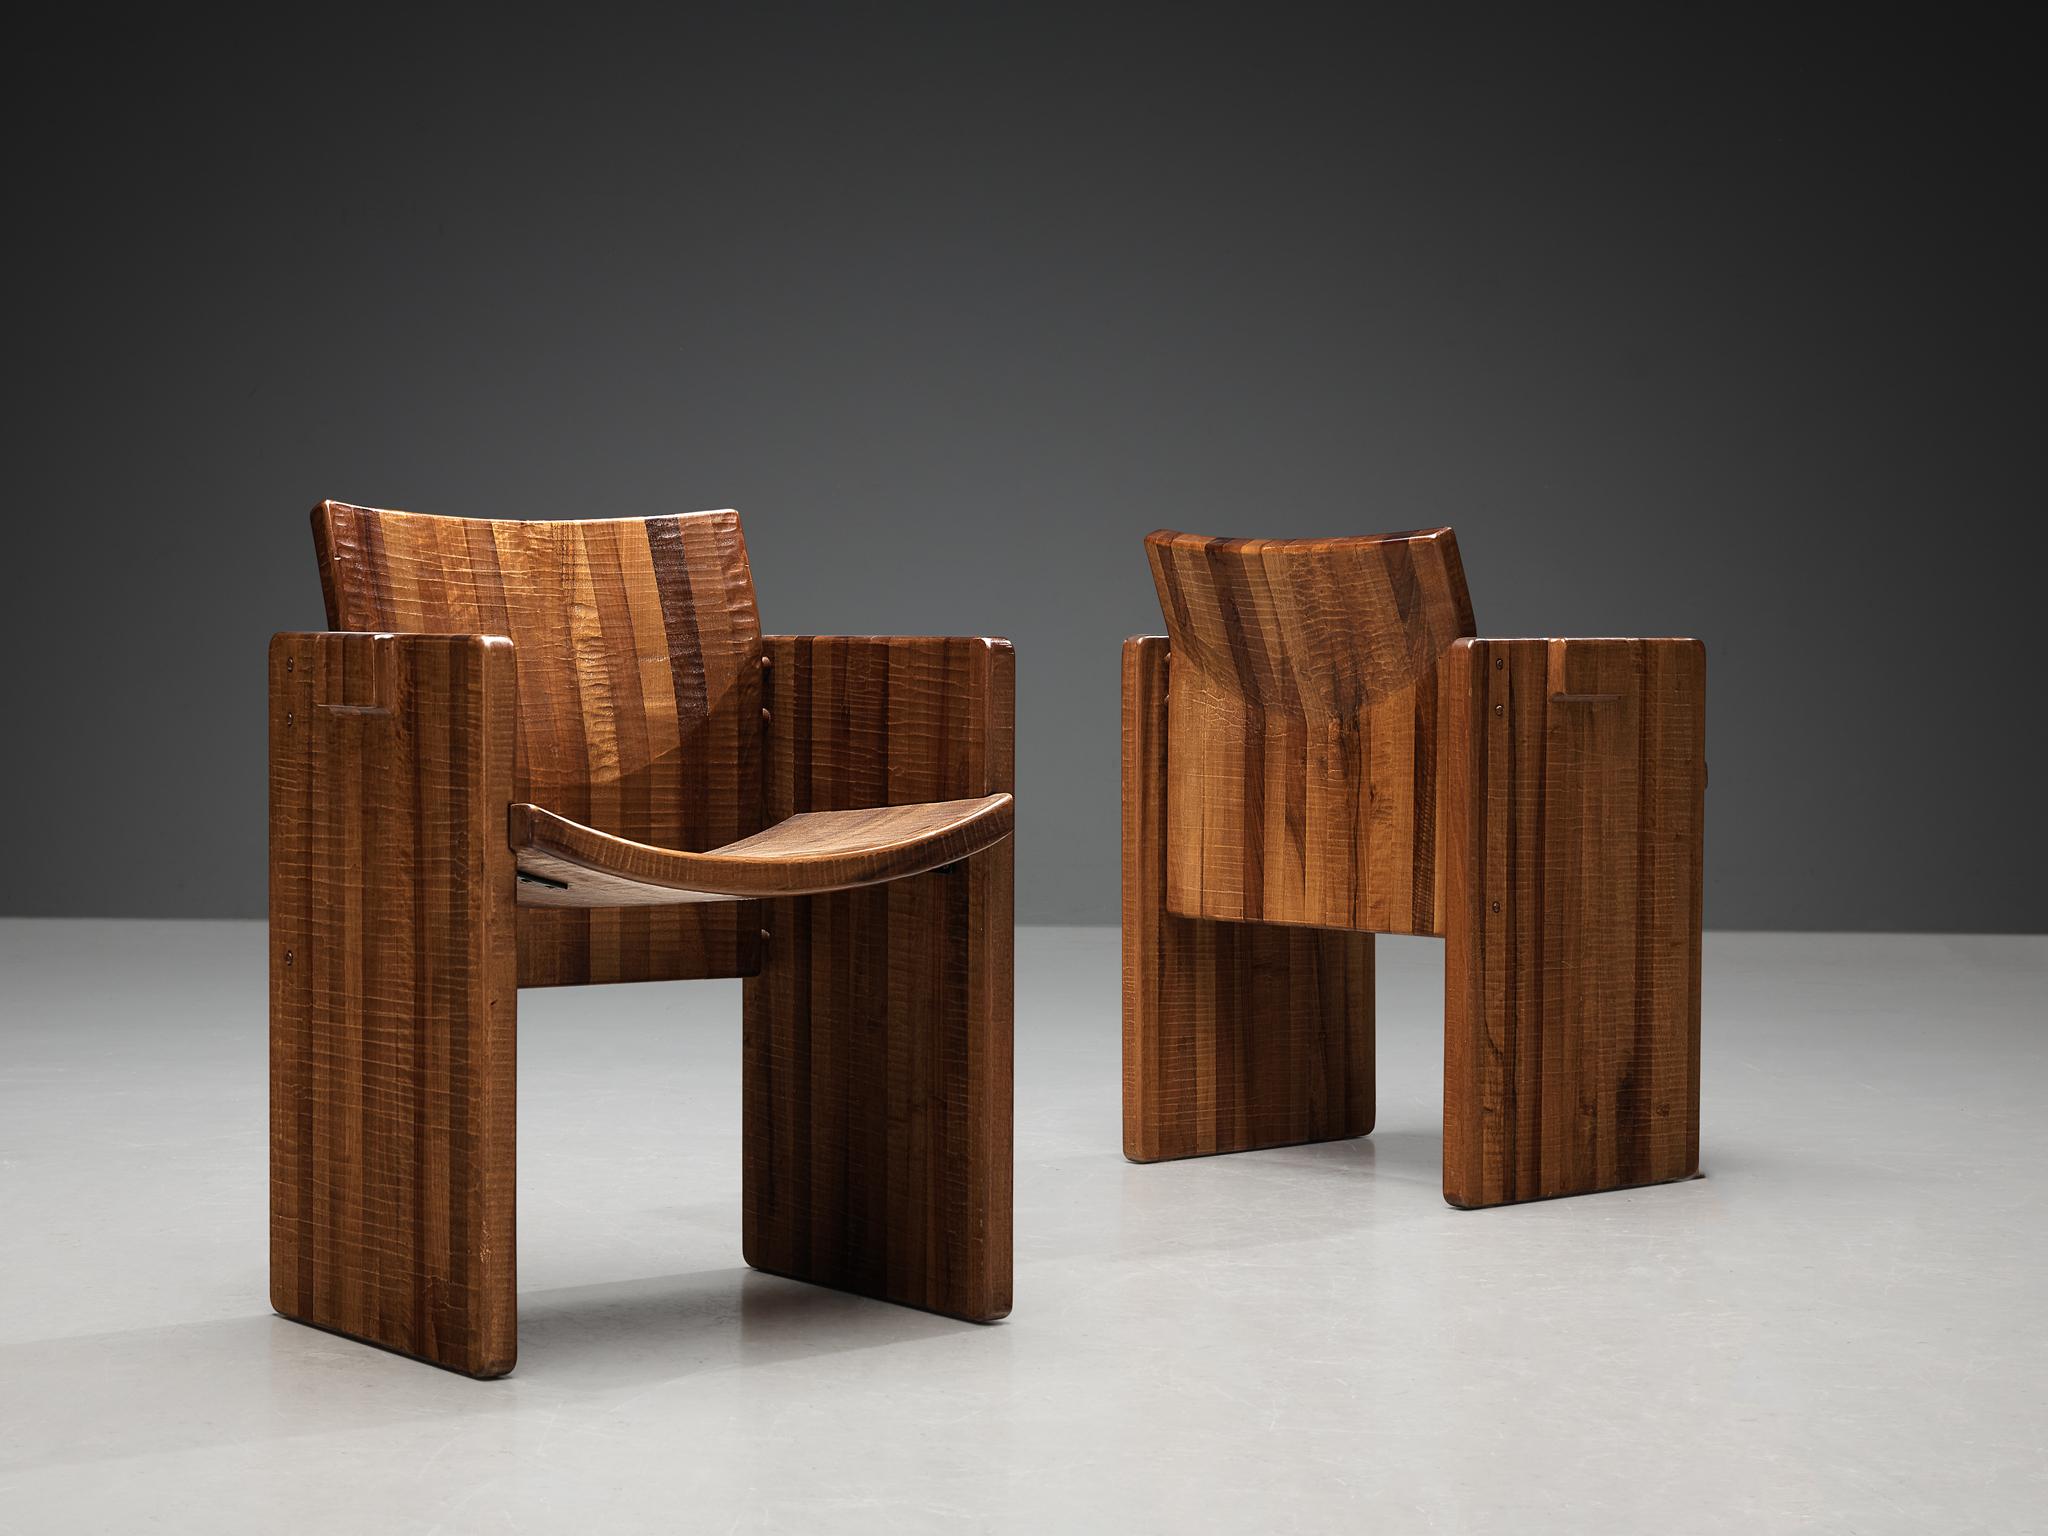 Giuseppe Rivadossi for Officina Rivadossi, pair of armchairs, walnut, Italy, 1980s

An exceptional pair of chairs by the Italian sculptor and designer Giuseppe Rivadossi, featuring a high level of craftsmanship in woodwork. This rare chair